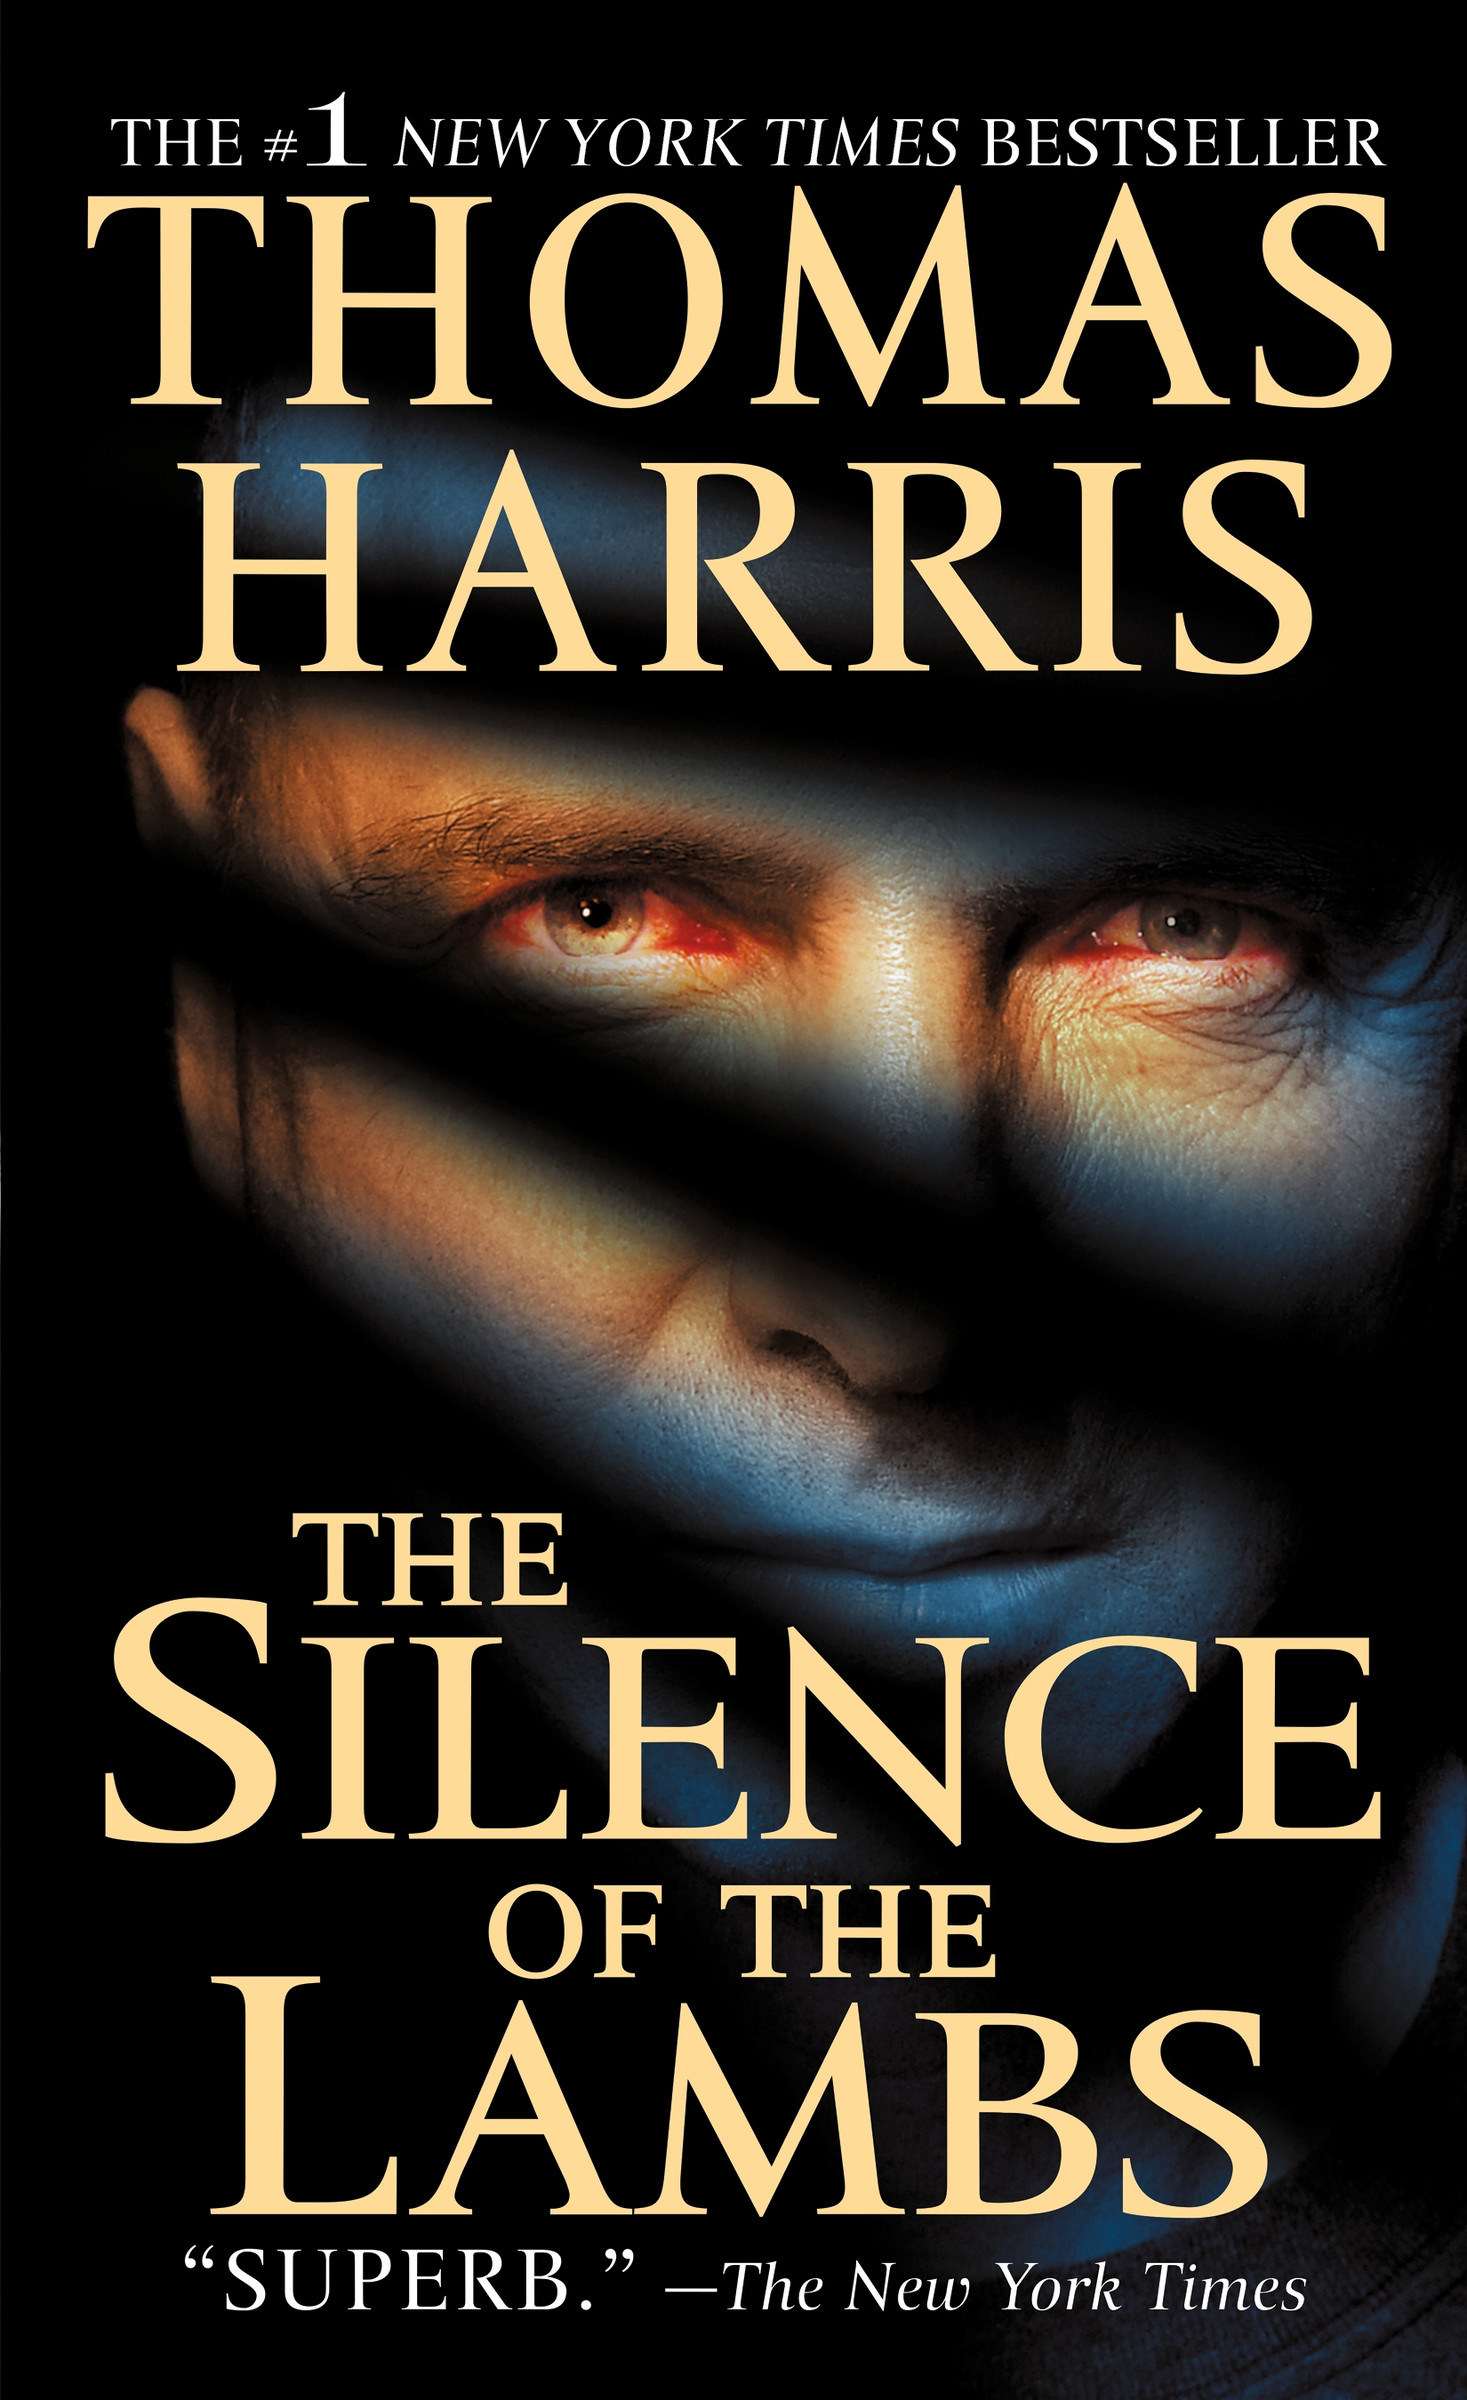 Hannibal Lecter - The Silence of the Lambs | Harris, Thomas (Auteur)